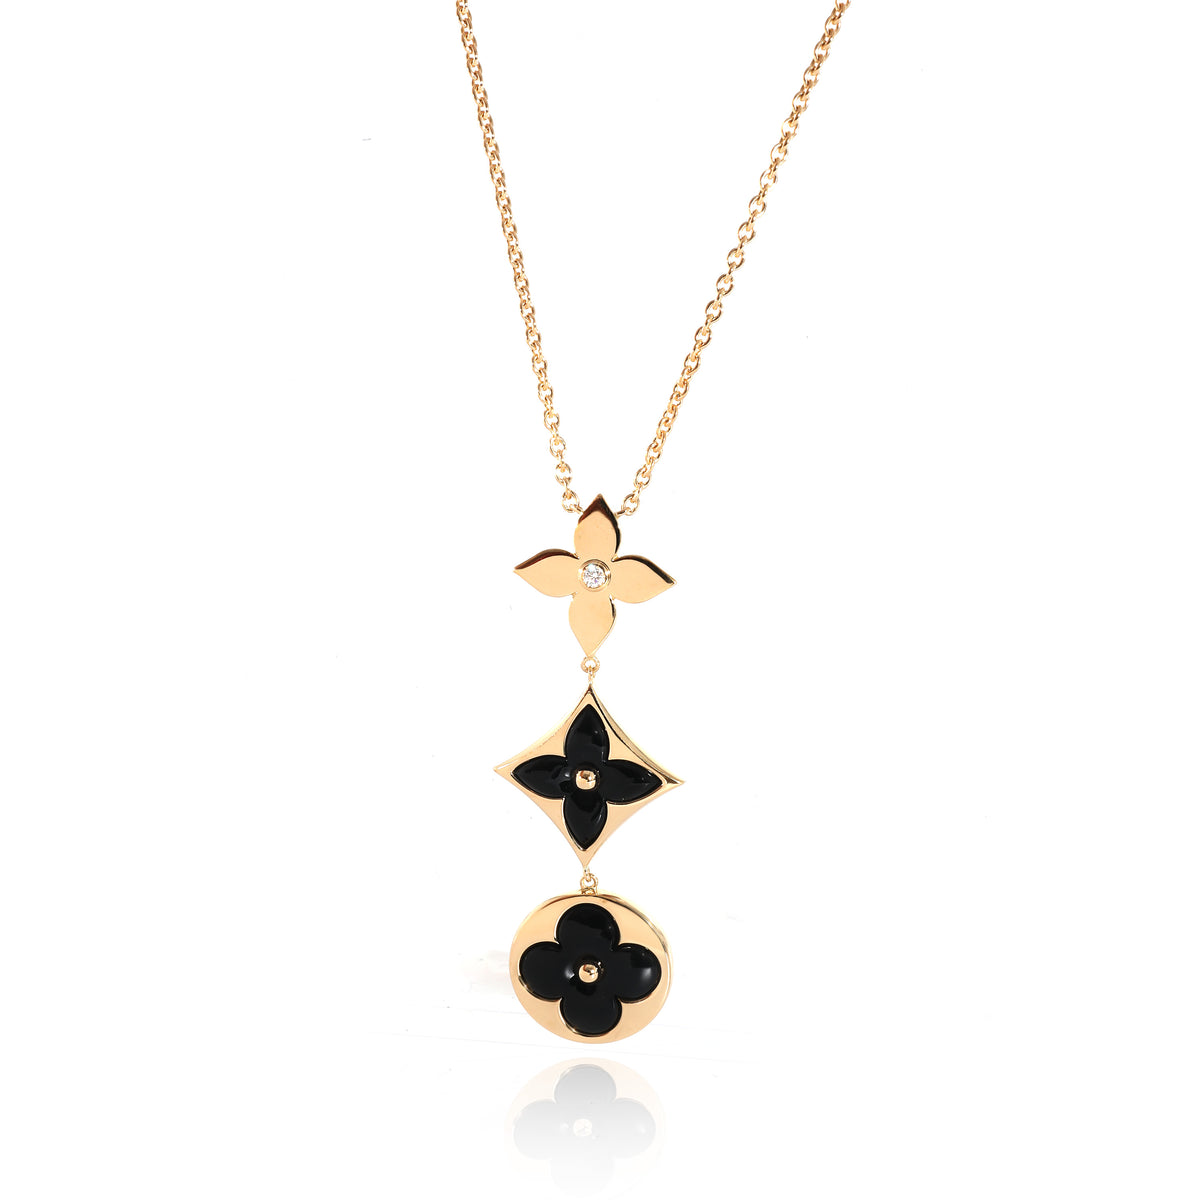 Louis Vuitton Color Blossom Necklace in 18K Yellow Gold 0.02 CTW